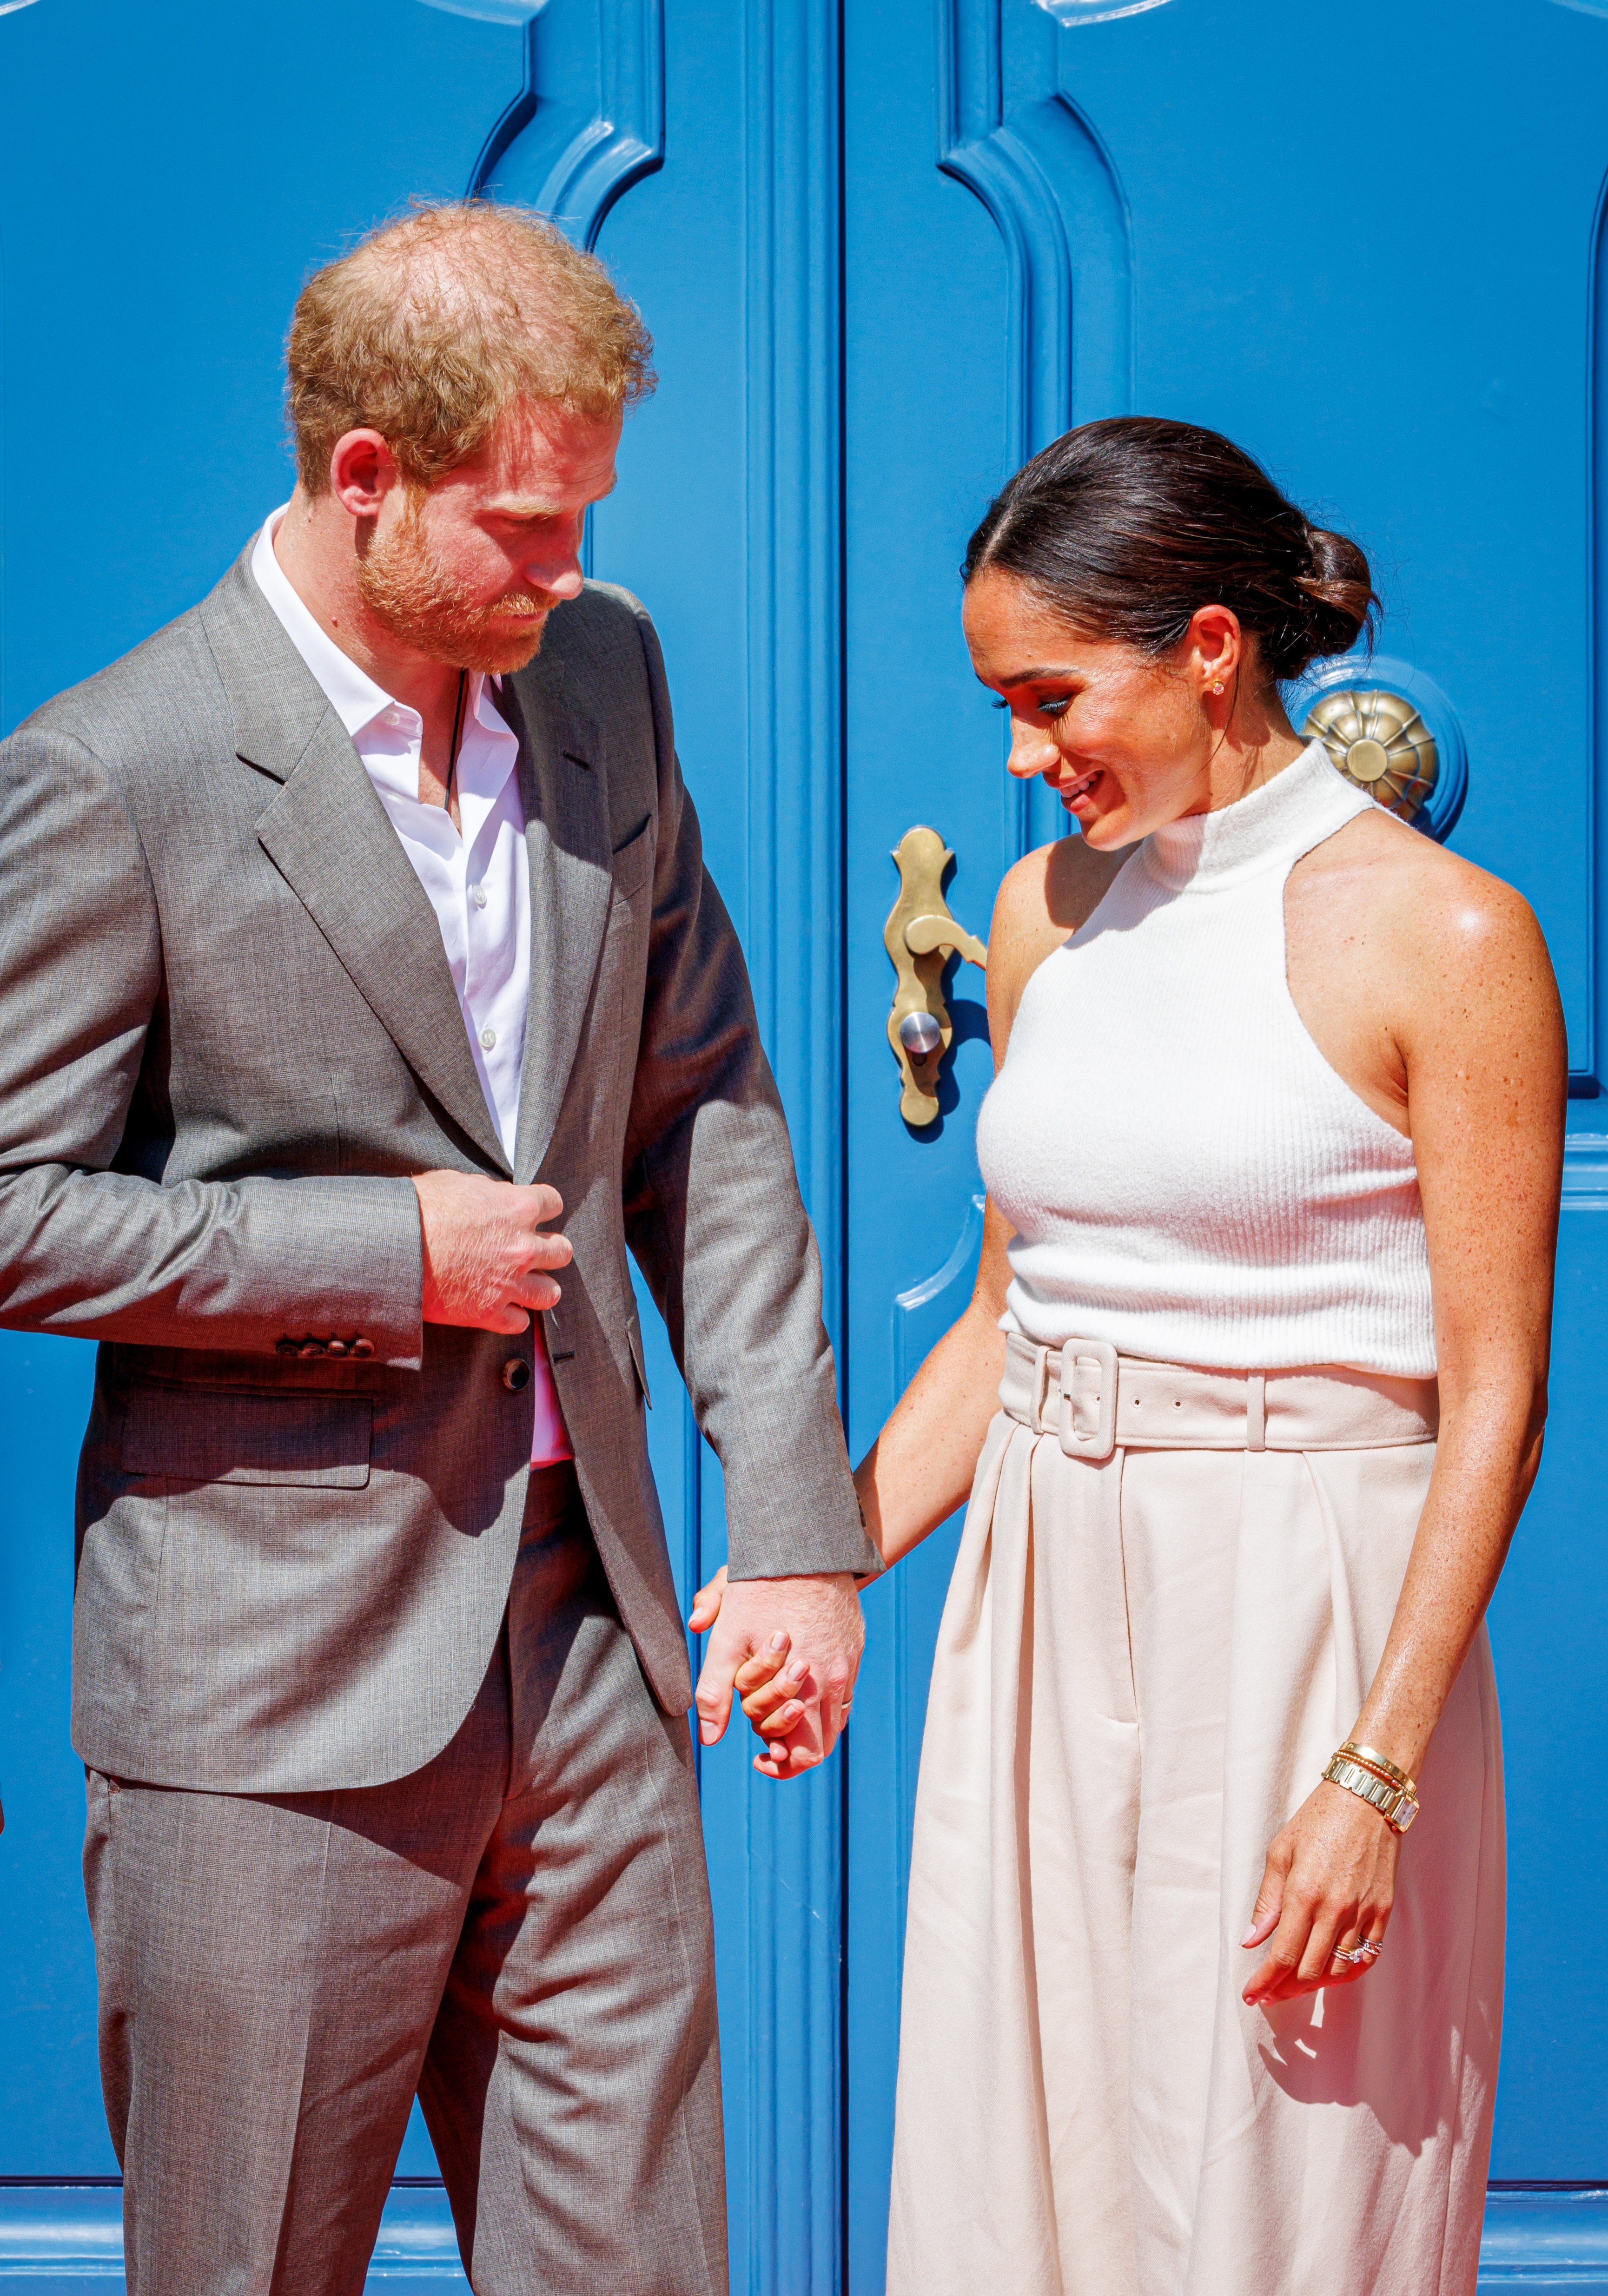 Prince Harry and Duchess Meghan at the city hall during the Invictus Games Dusseldorf 2023 - One Year To Go events on September 6, 2022, in Dusseldorf, Germany | Source: Getty Images